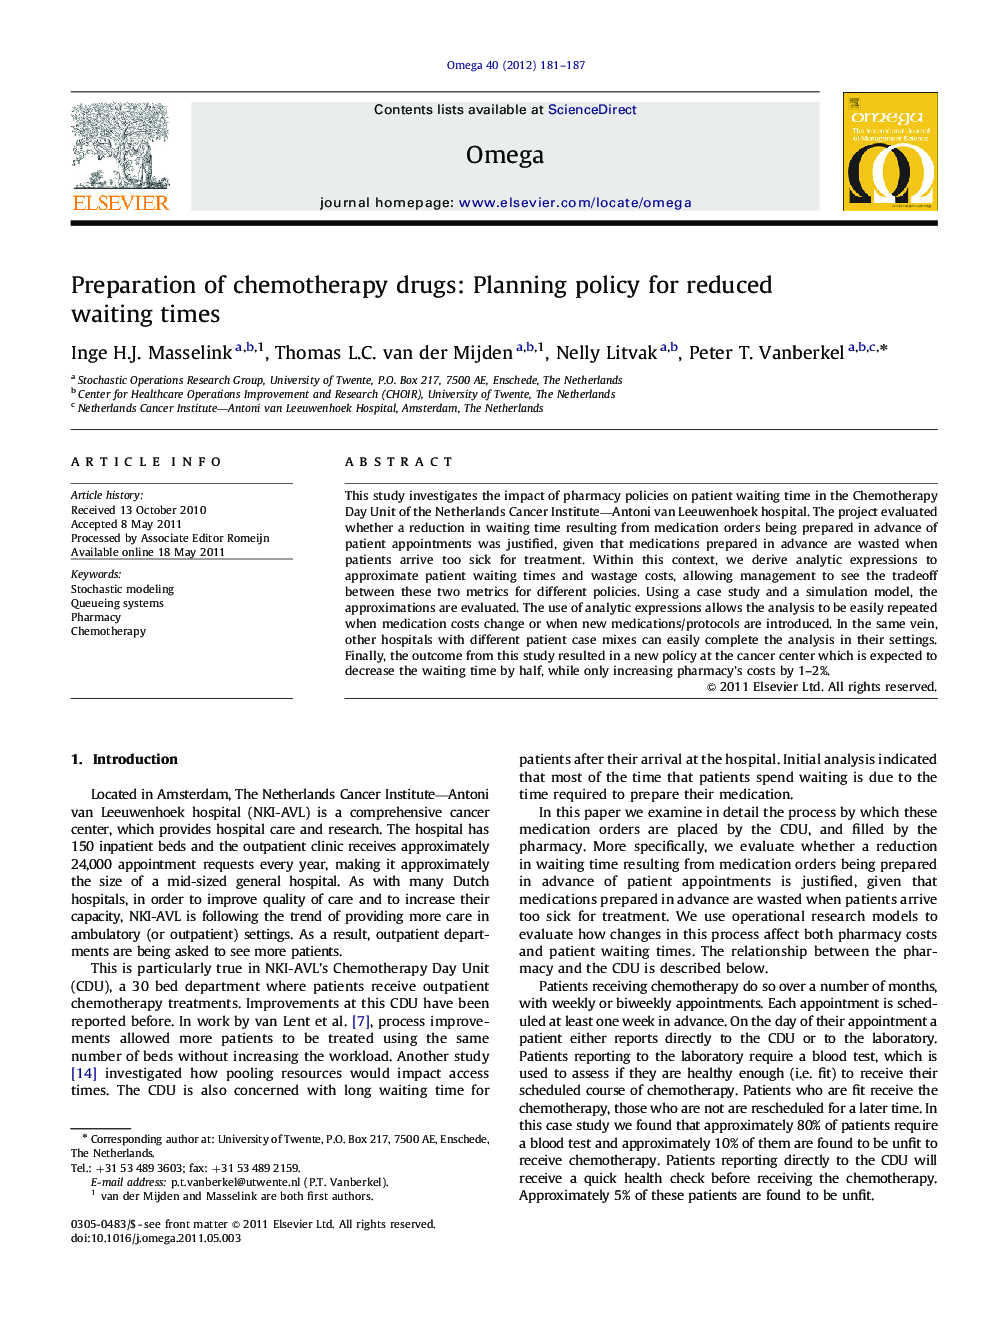 Preparation of chemotherapy drugs: Planning policy for reduced waiting times